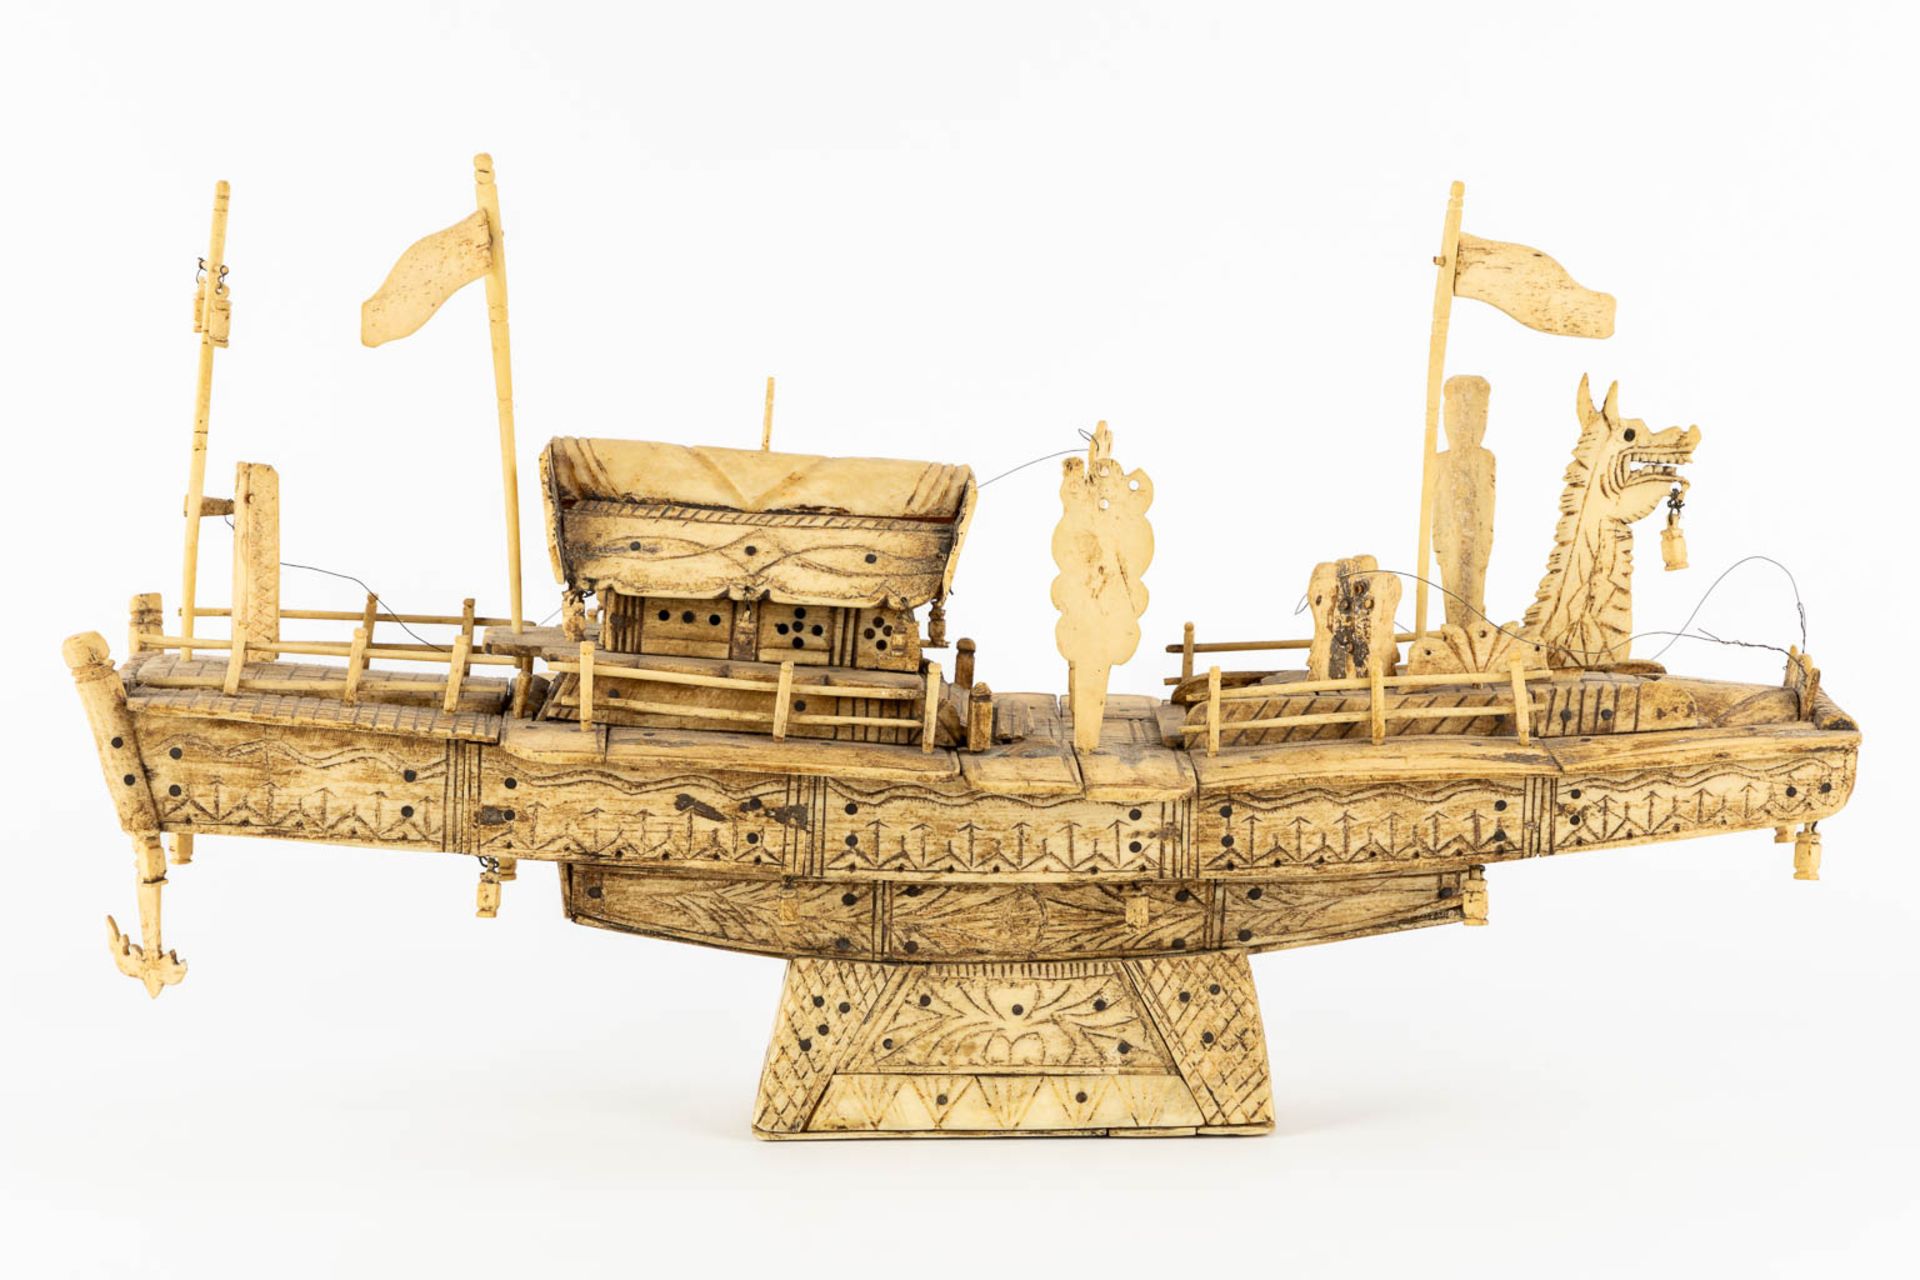 An antique Chinese model of a ship, sculptured bone. Circa 1900. (L:13 x W:50 x H:28 cm) - Image 5 of 11